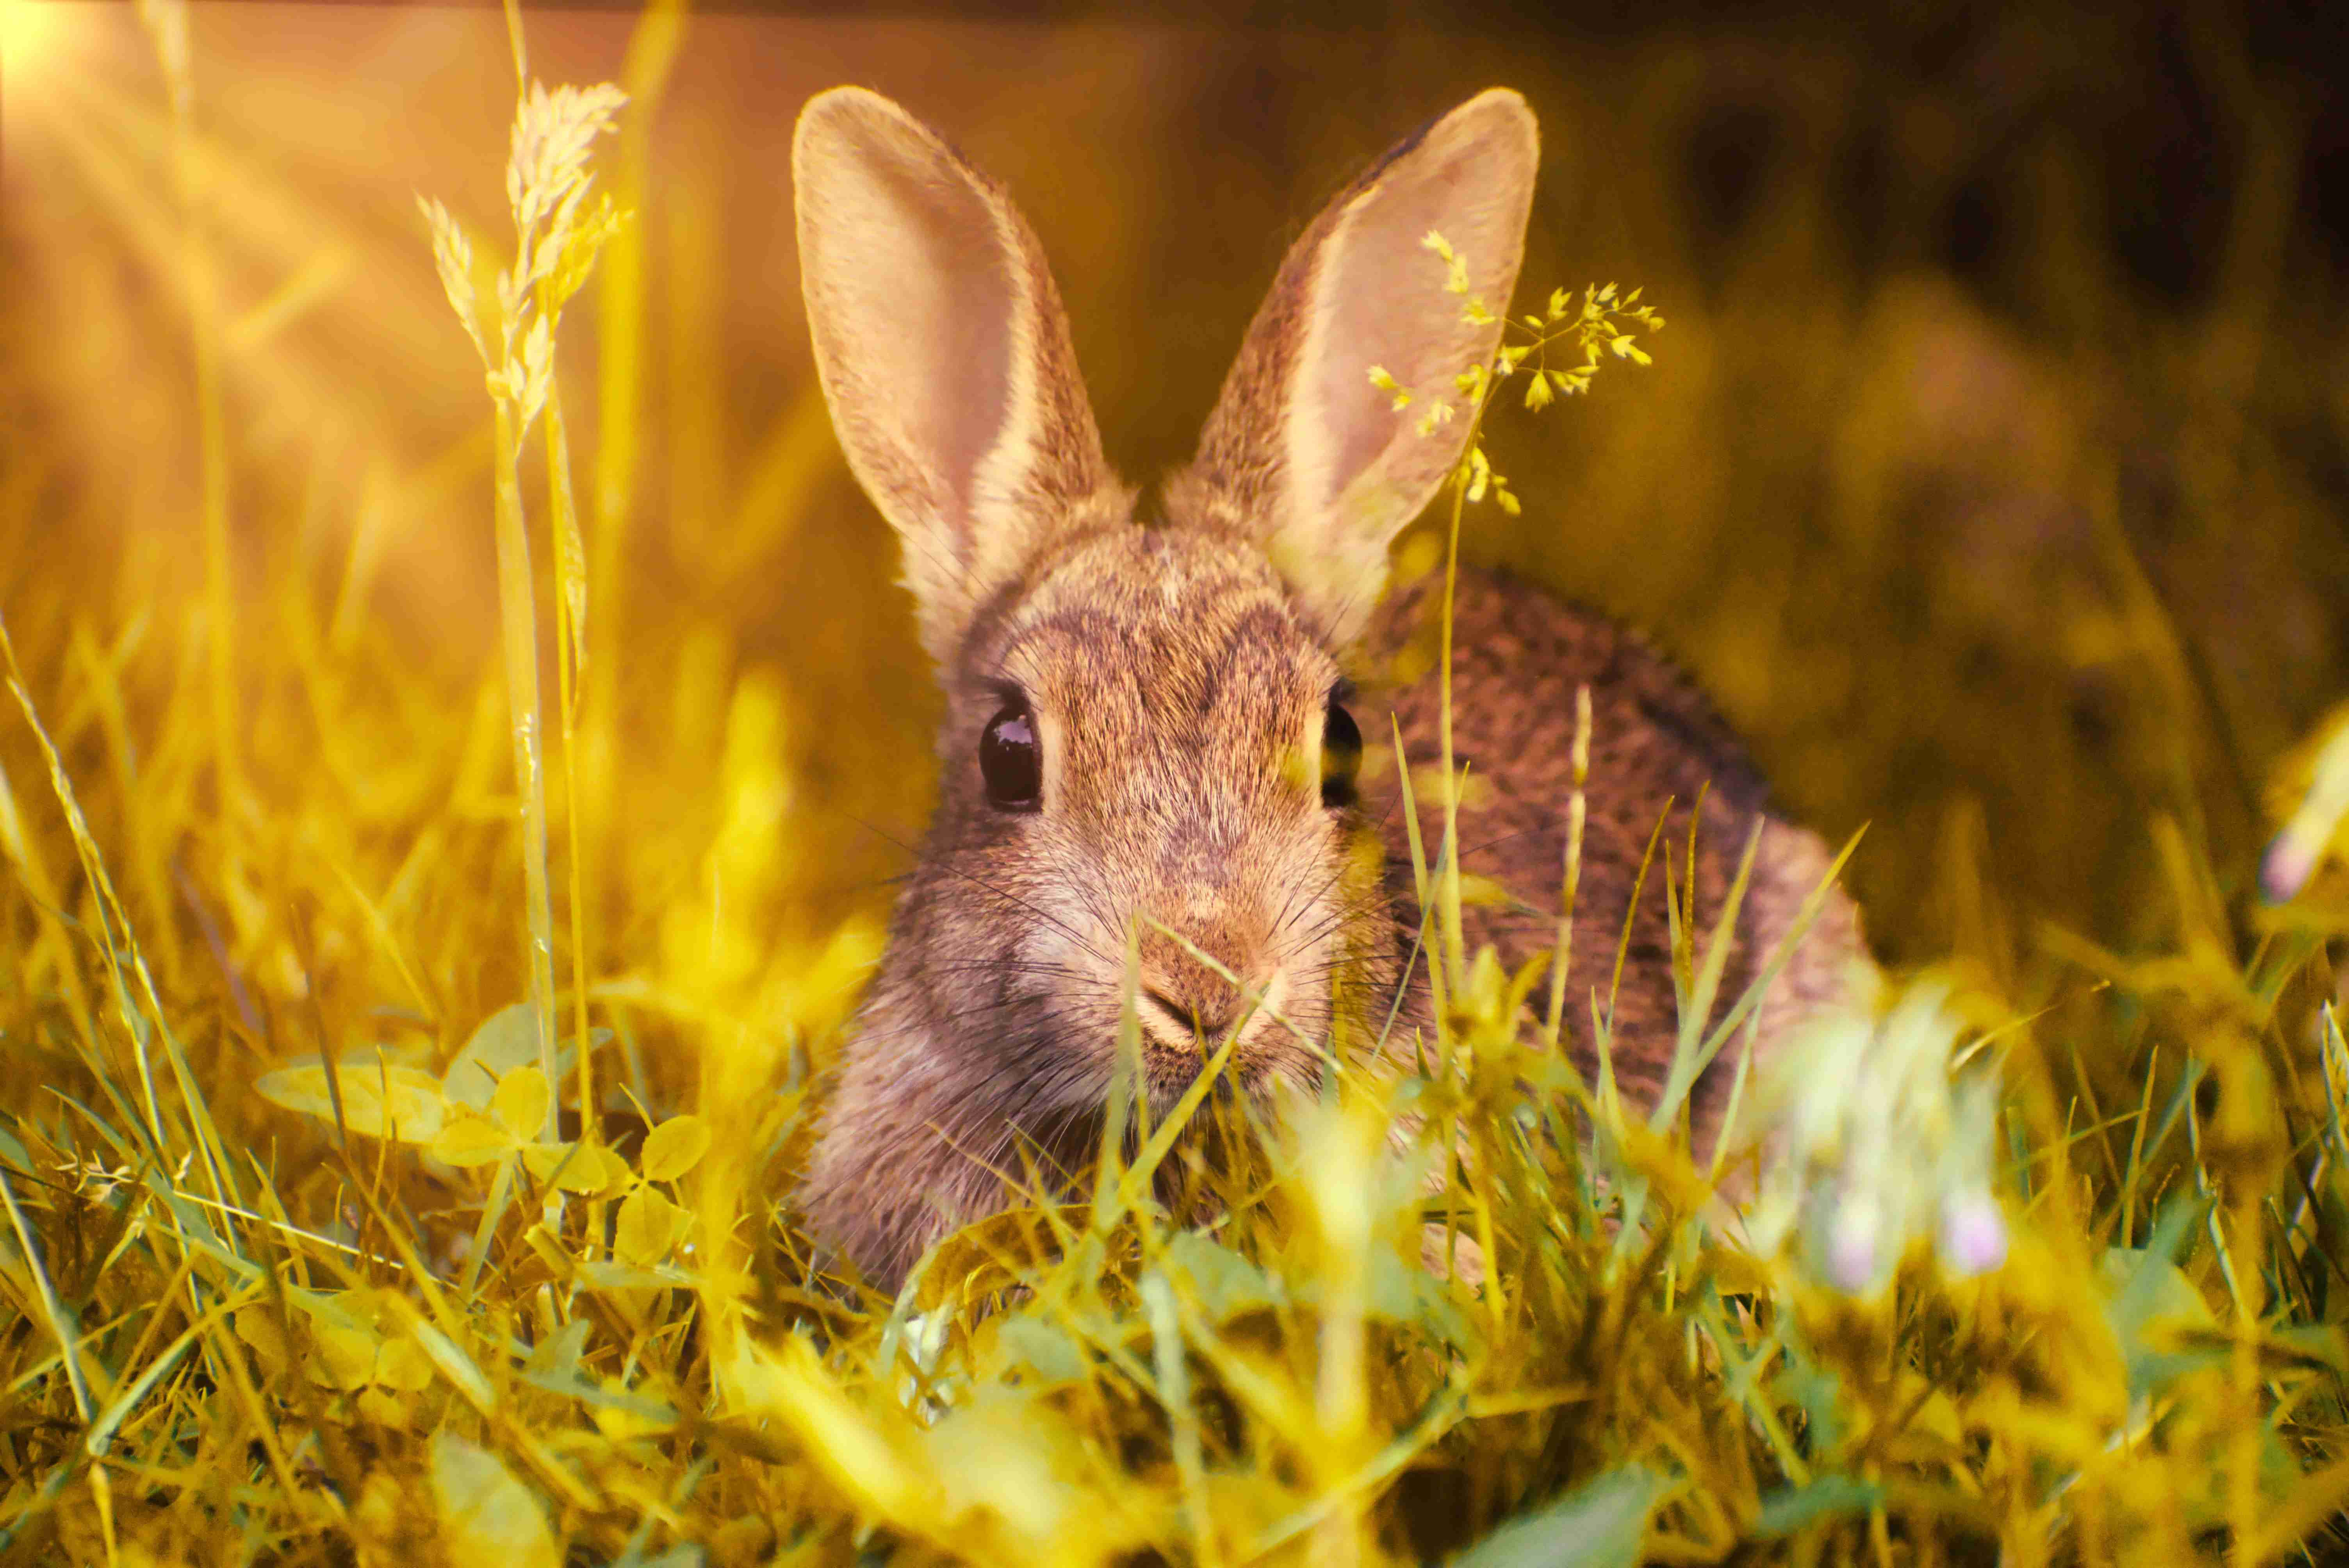 5 Tips to Keep Your Pet Rabbit UTI-Free: Preventative Measures for a Healthy Bunny